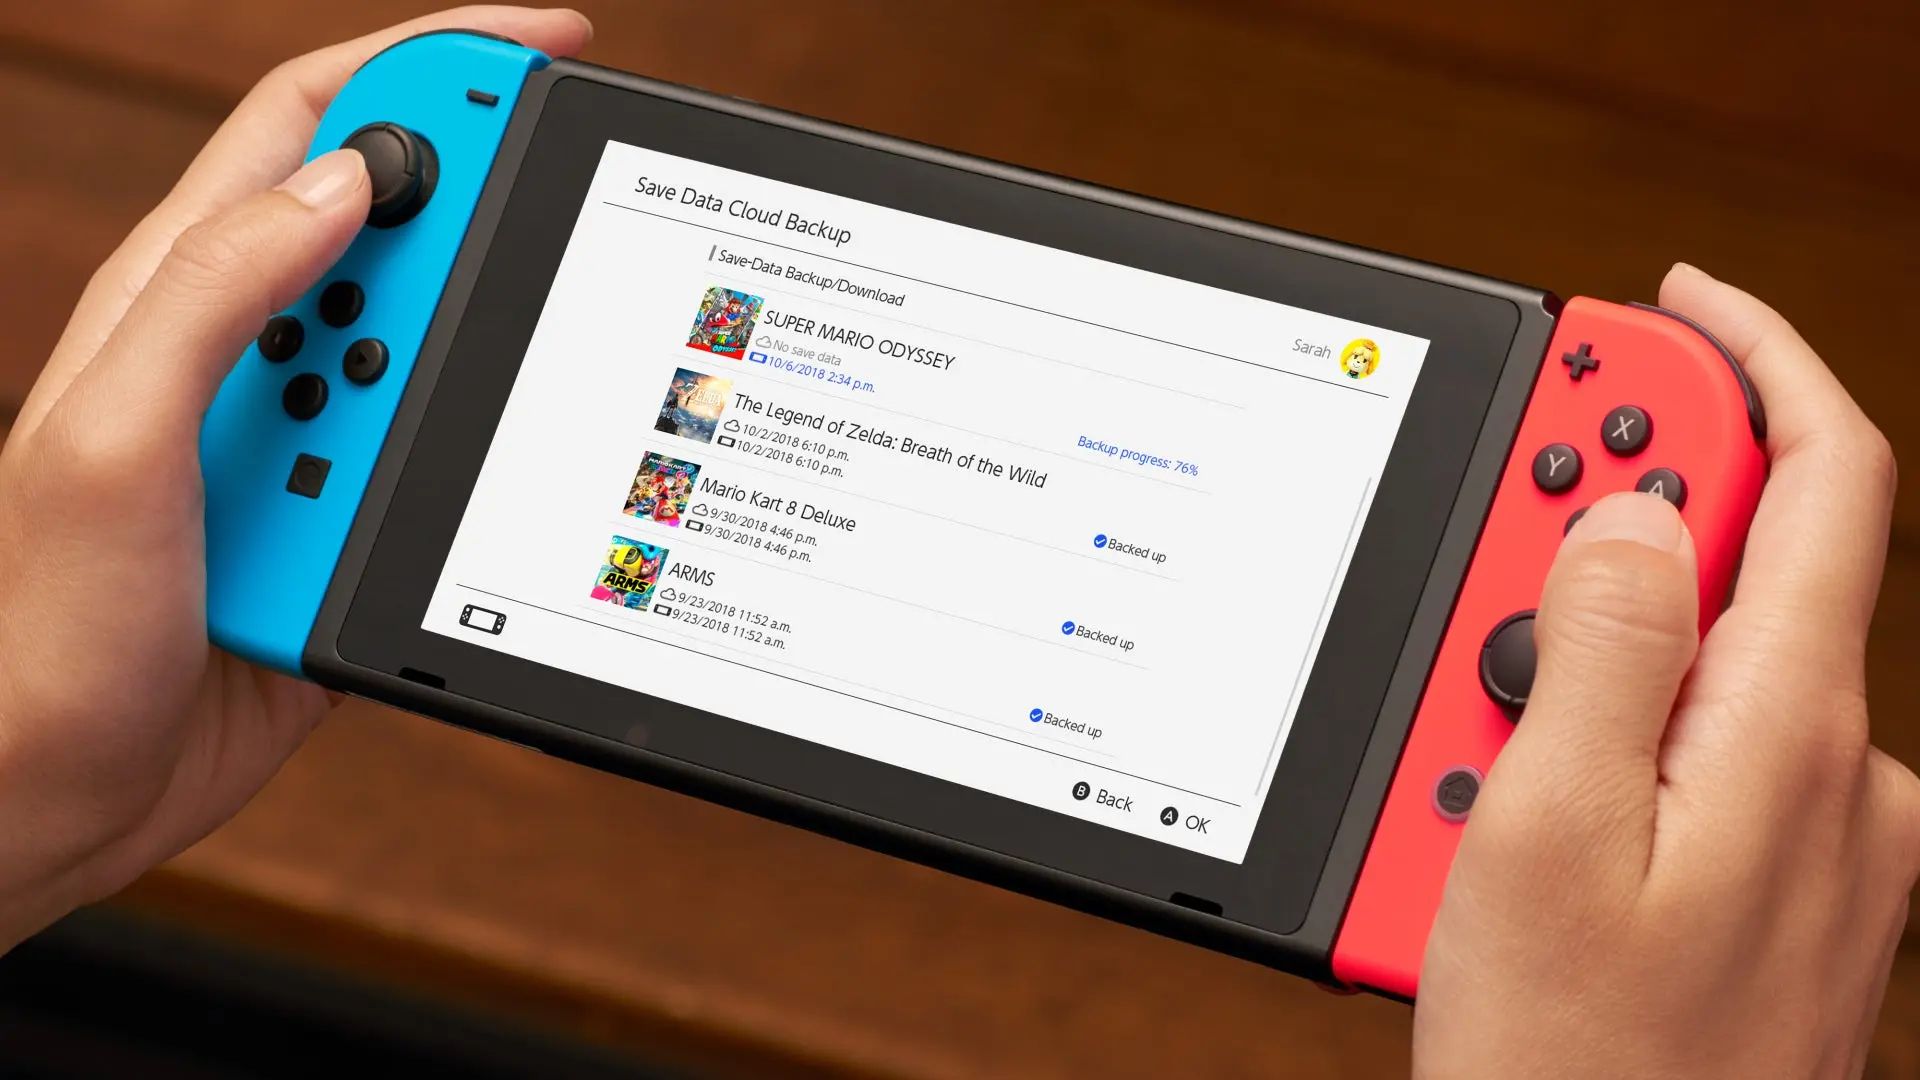 How To Download Nintendo Switch Games For Free